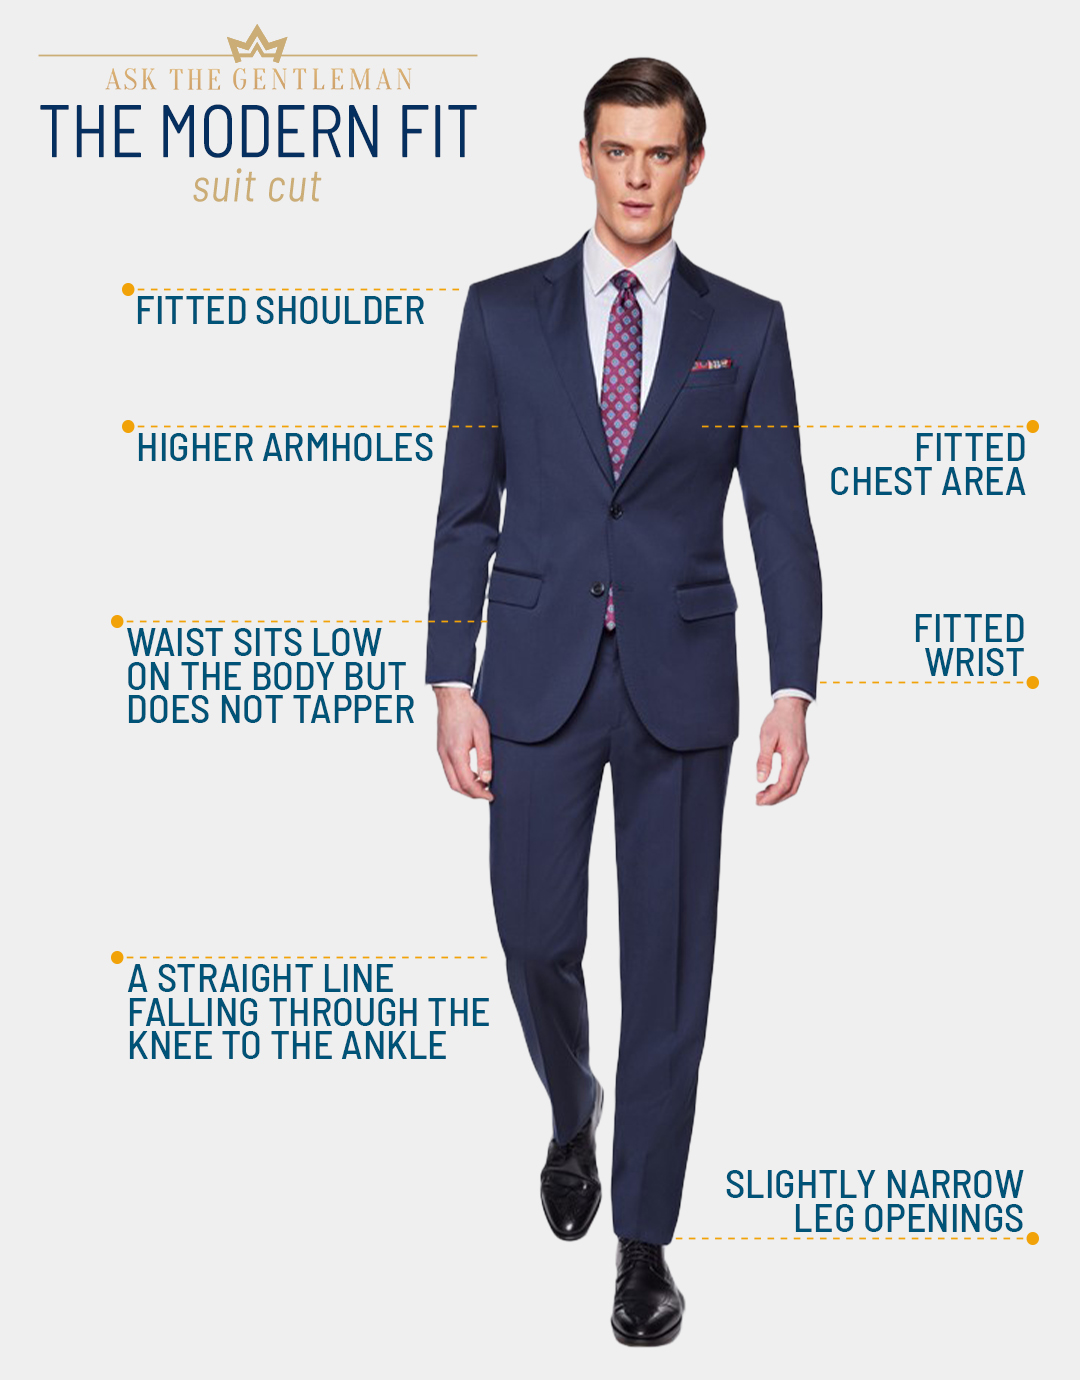 What is a modern-fit suit cut